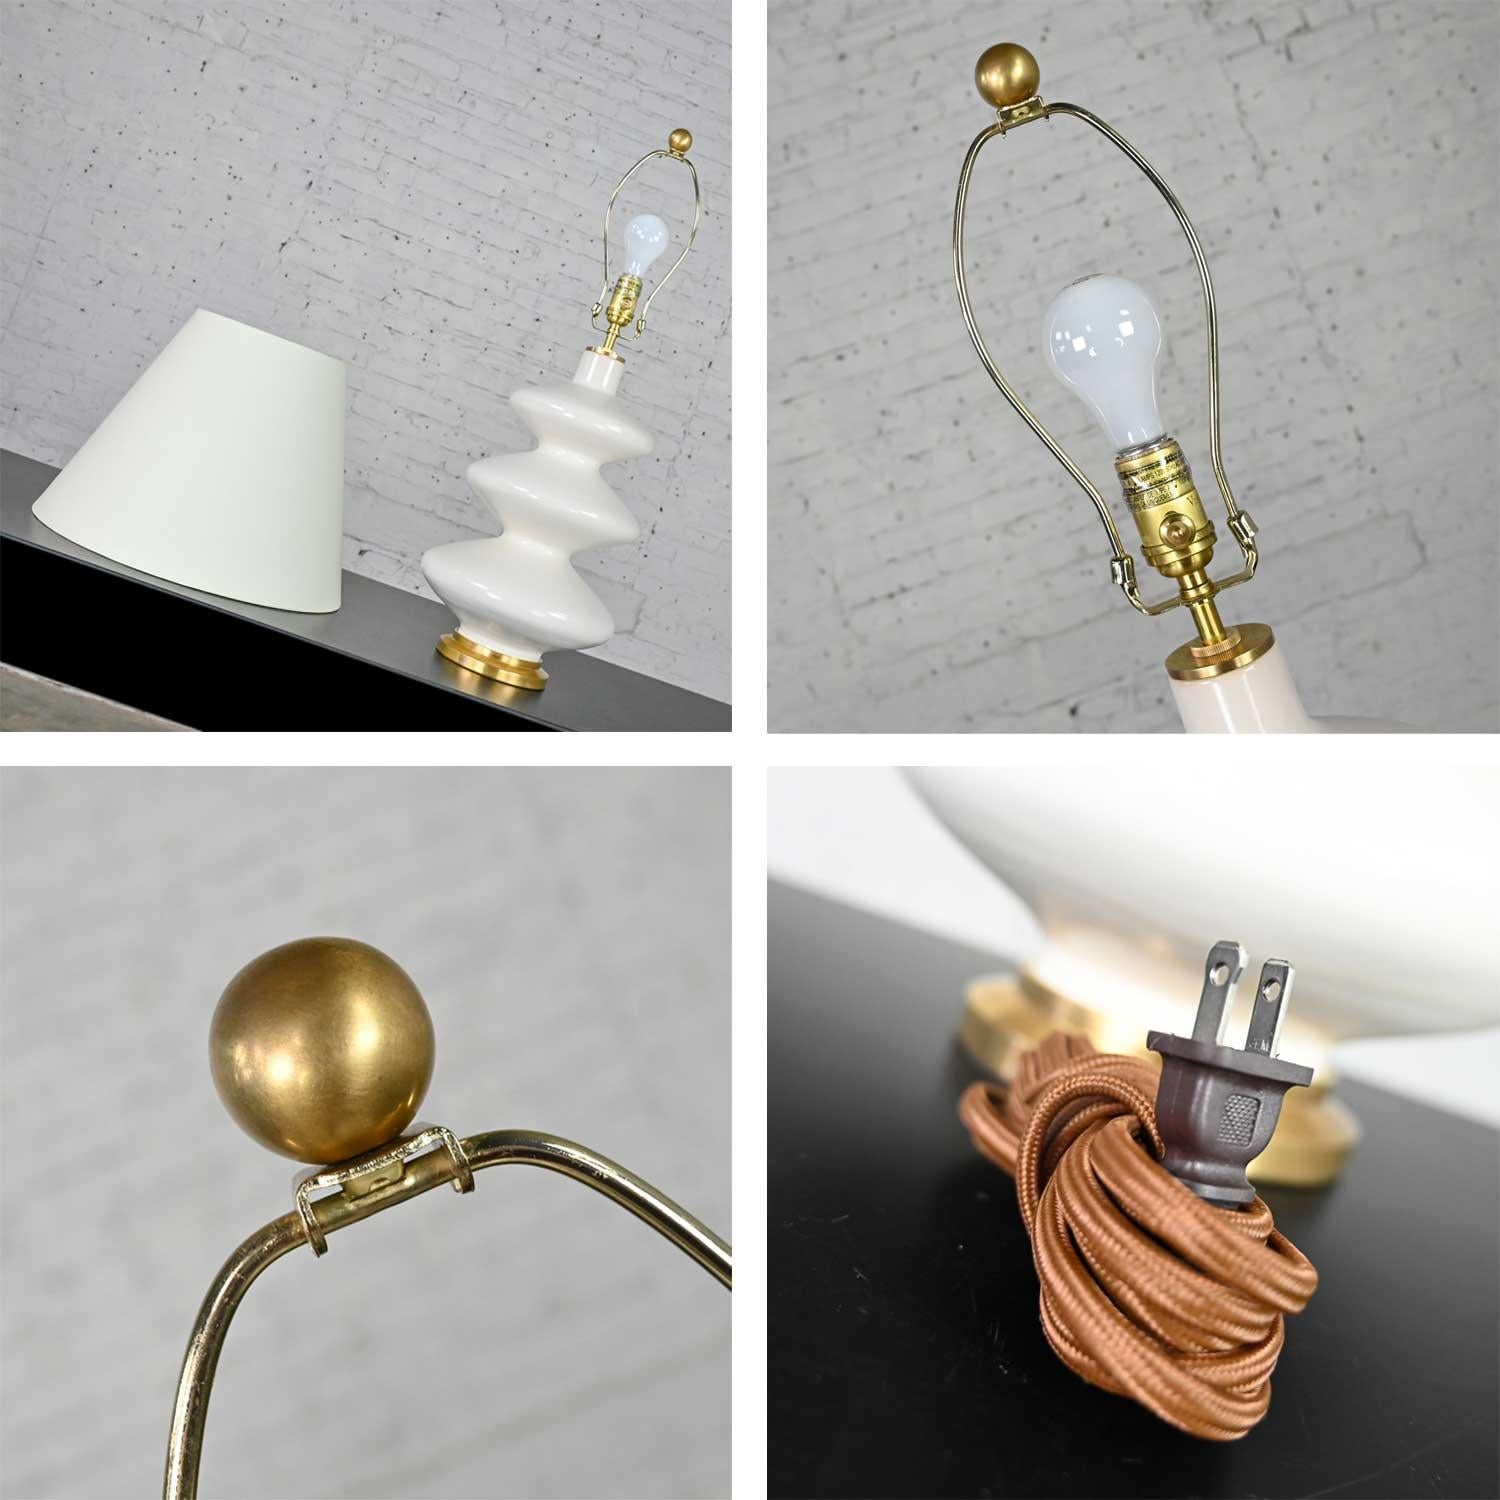 Smith Ivory Table Lamp Brass Details Christopher Spitzmiller for Visual Comfort 6